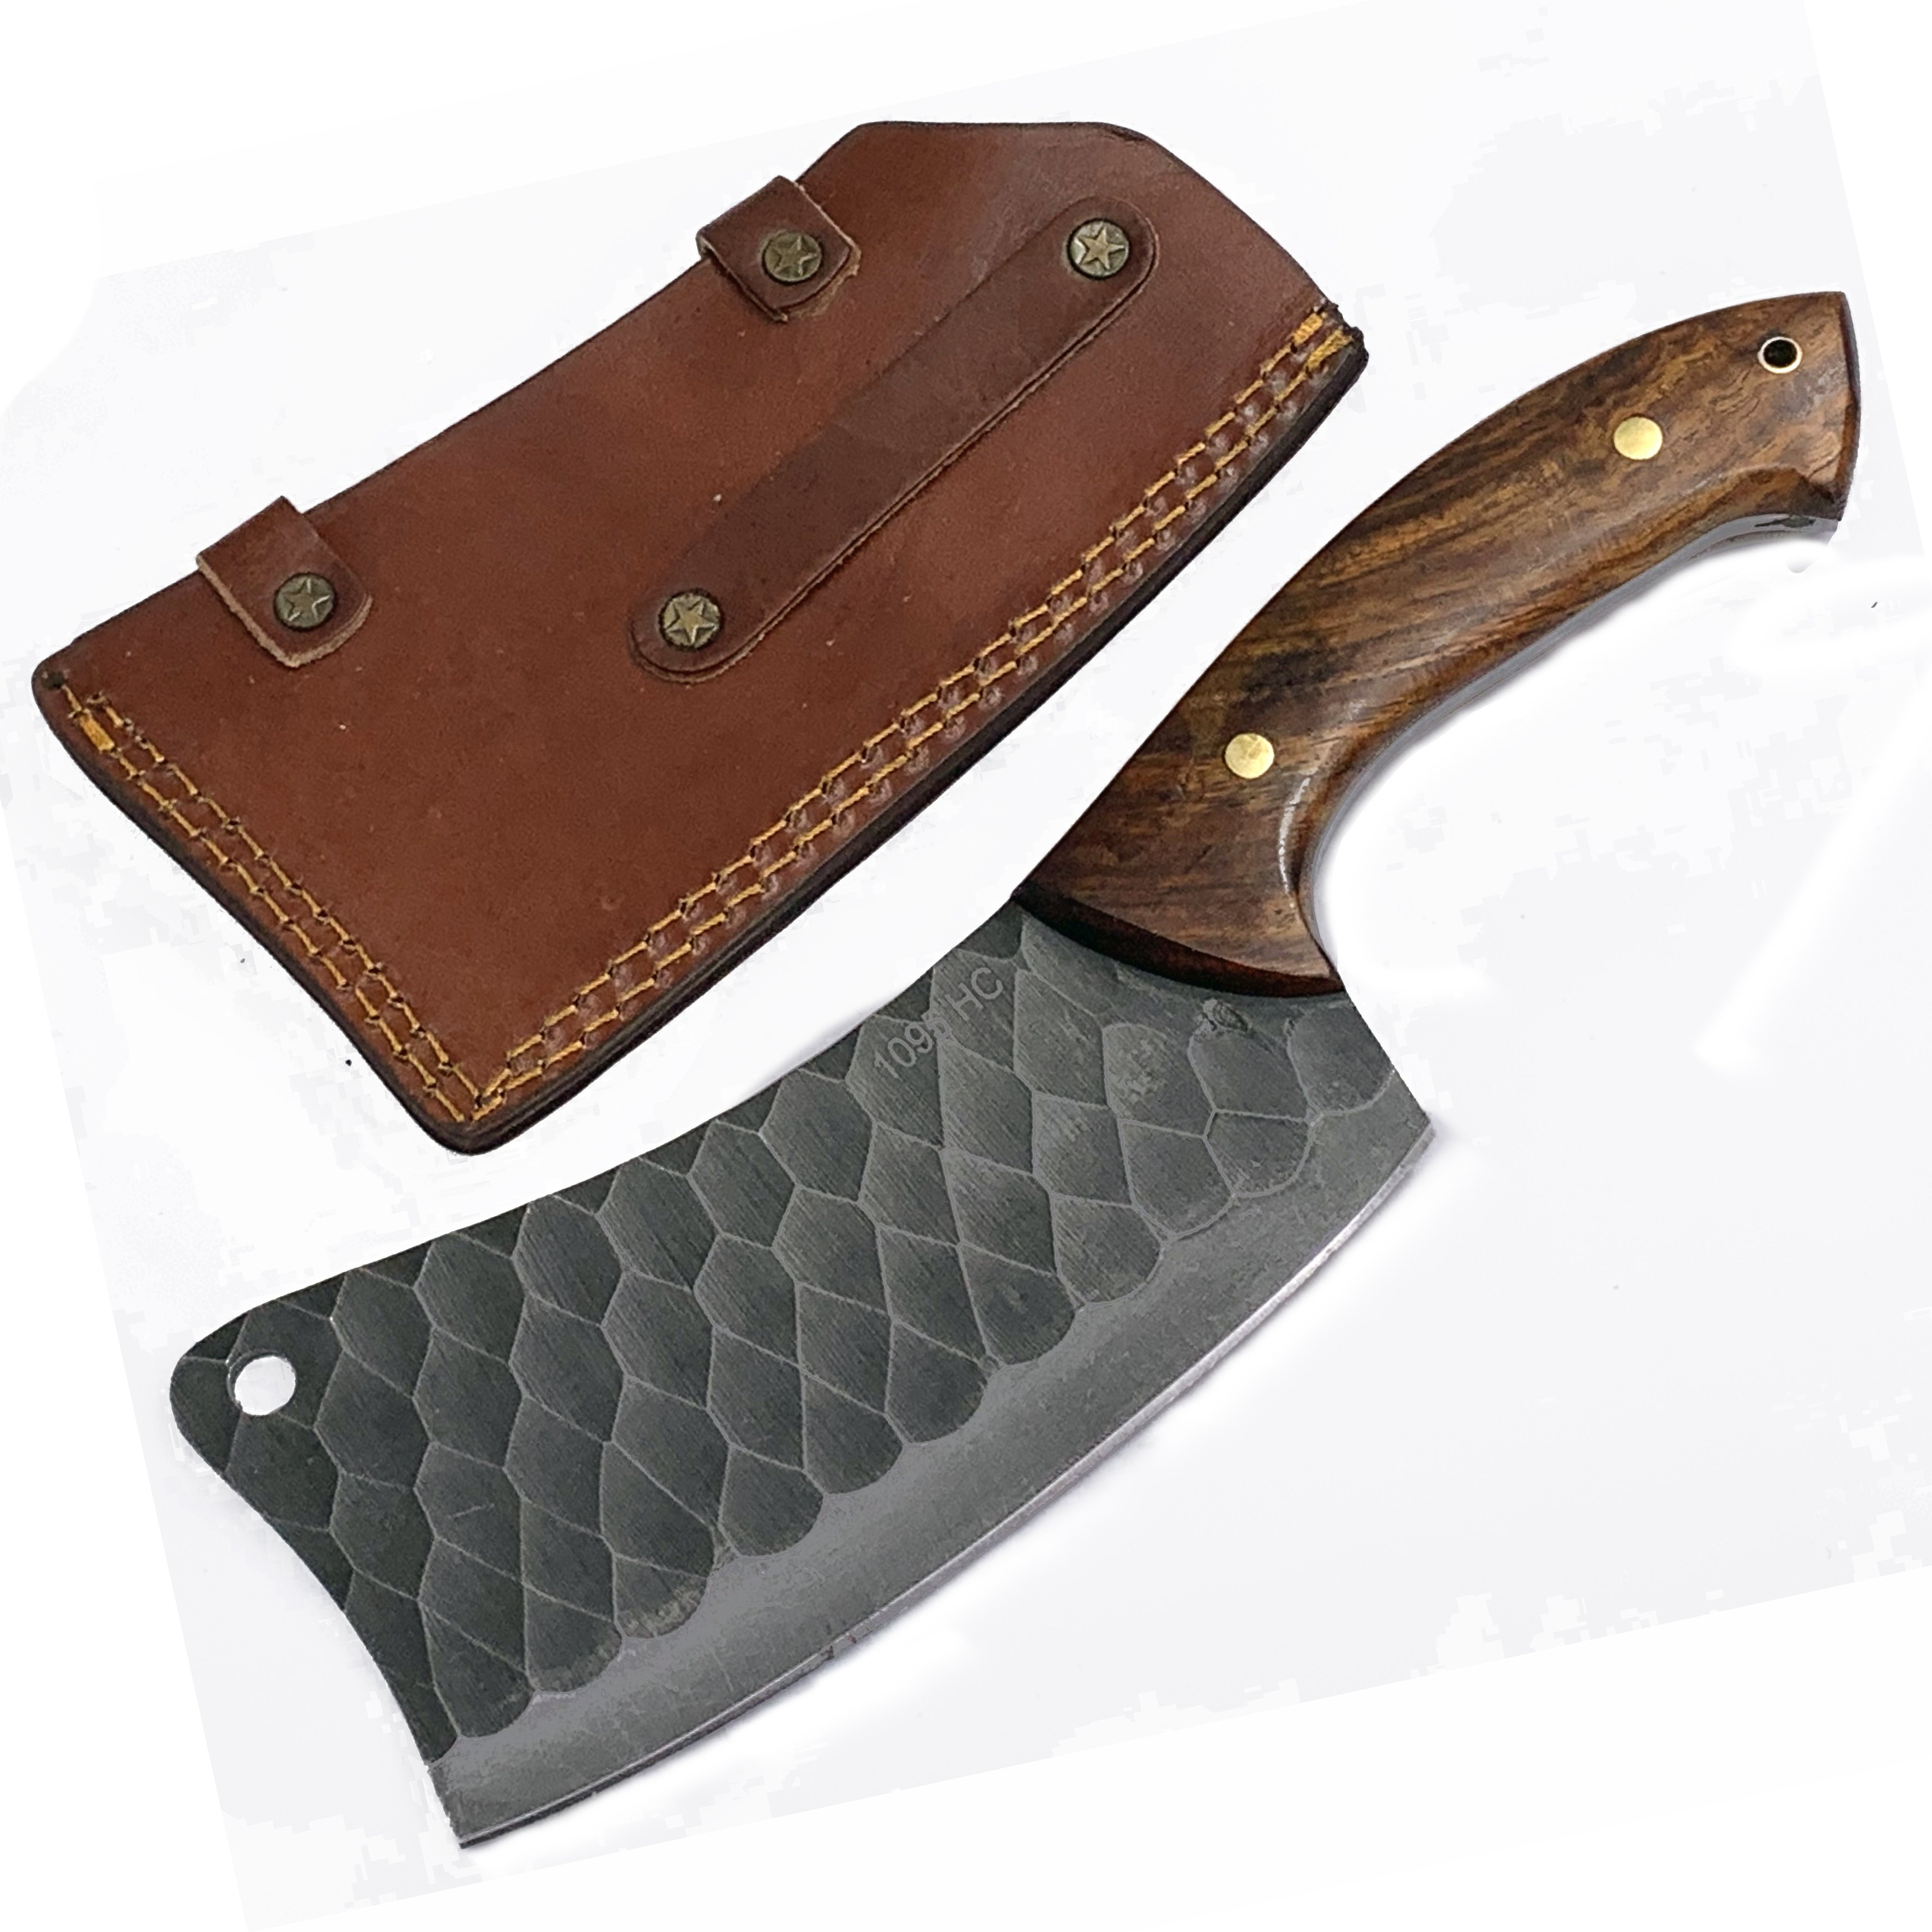 Hardwood Handle 12 inch Meat Cleaver with 1095 High Carbon Steel Full Tang Blade